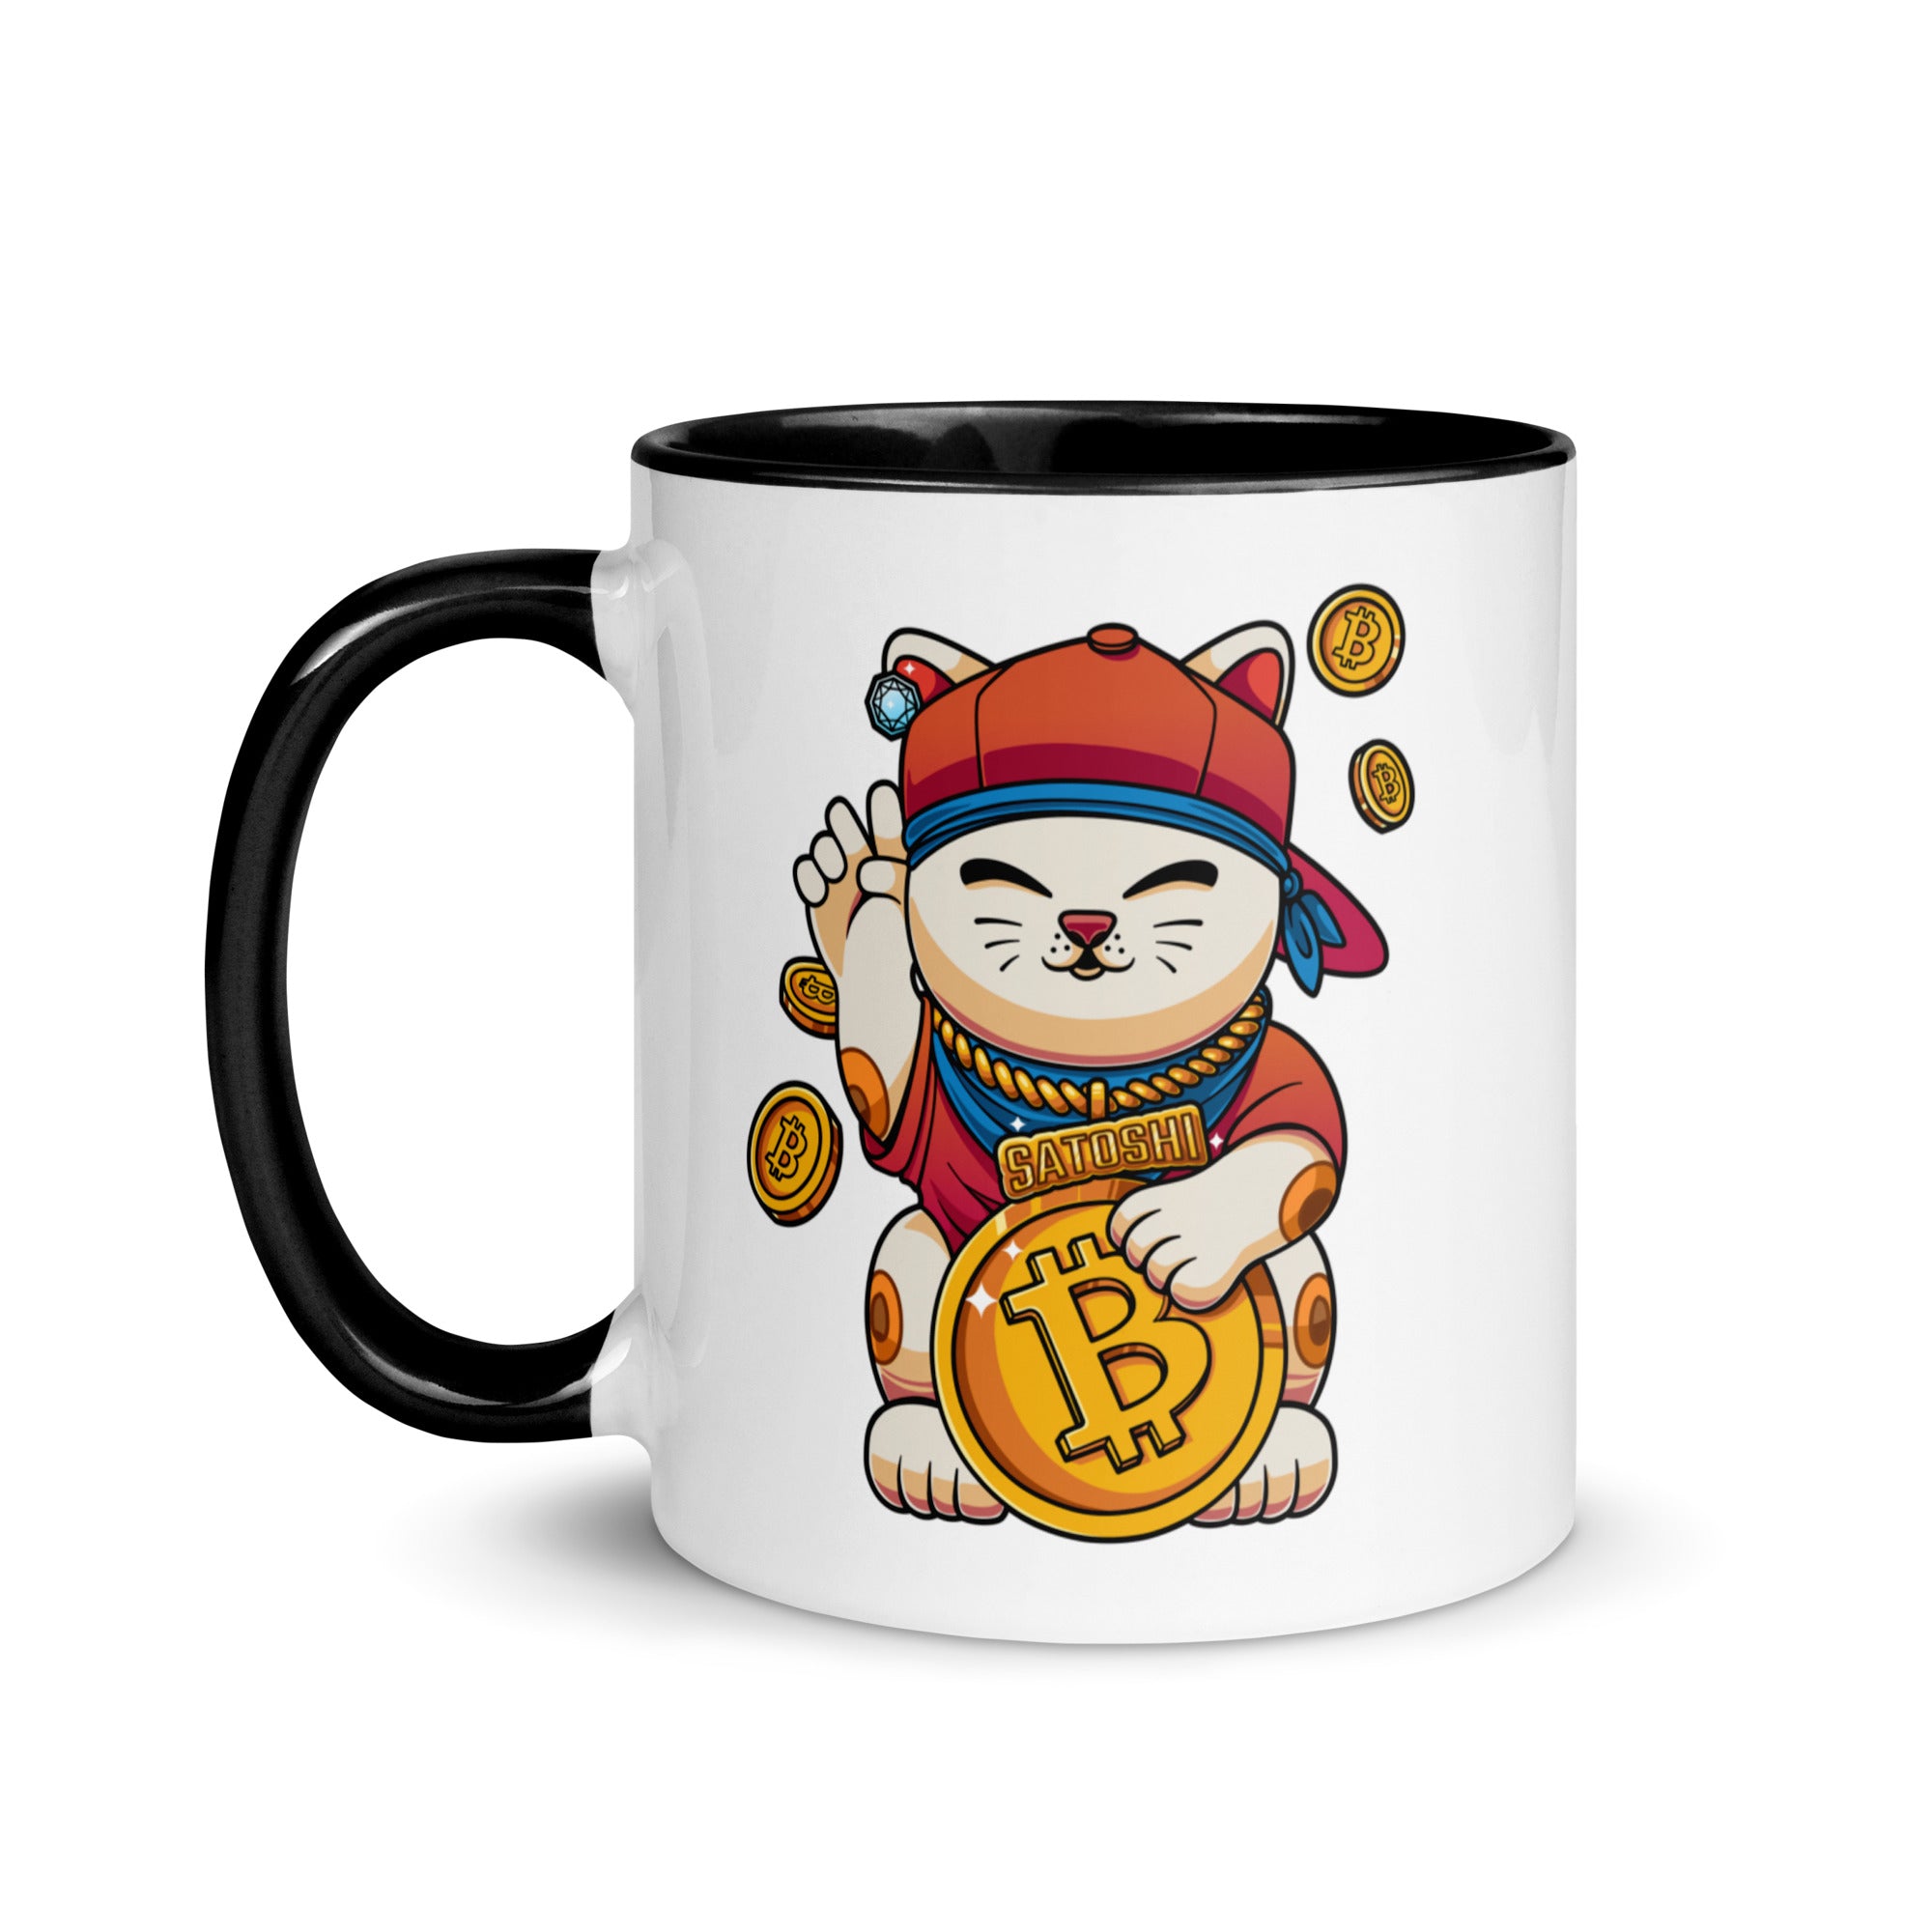 Bitcoin Drinkware: Bitcoin Gift: Satoshi Lucky Cat Mug. Left Handle View. Available from NEONCRYPTO STORE.